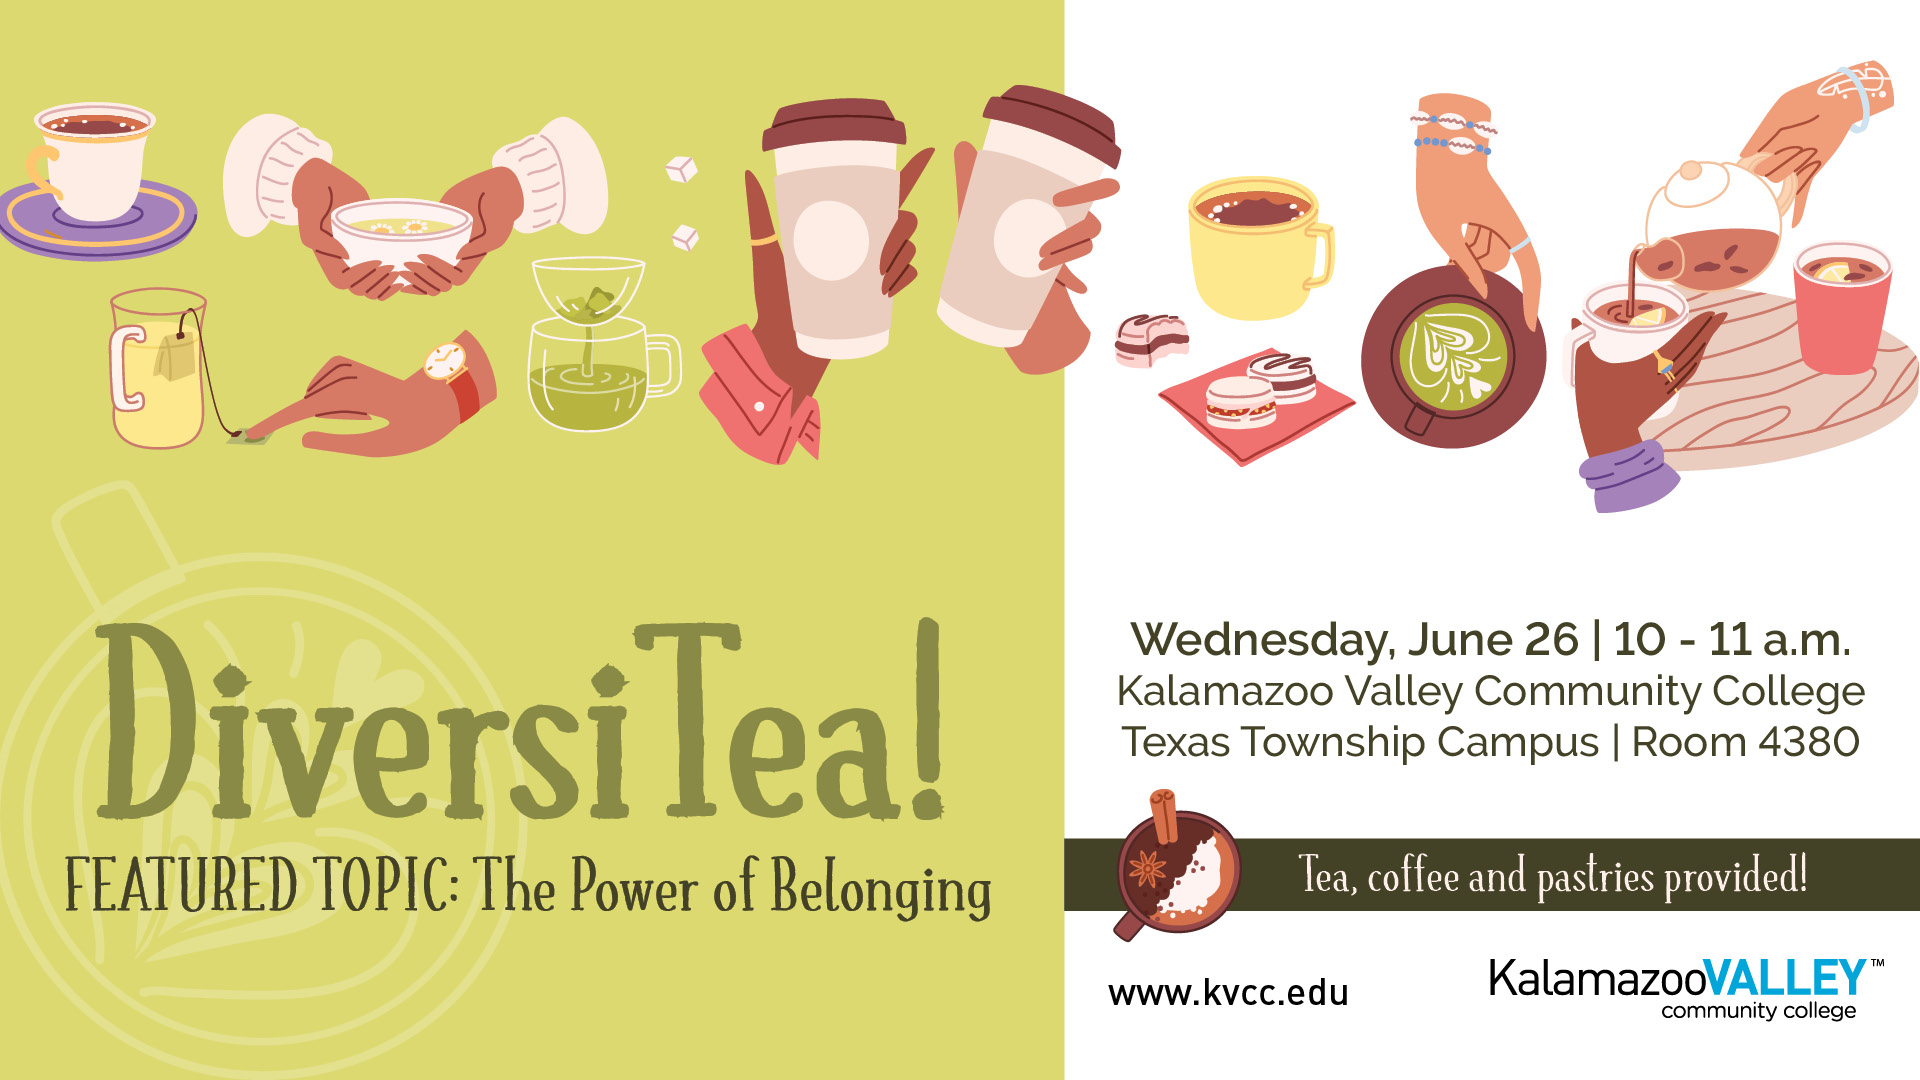 DiversiTea! Wed. June 26, 10-11am, Texas Township Campus, Room 4380 - Featured Topic: The Power of Belonging